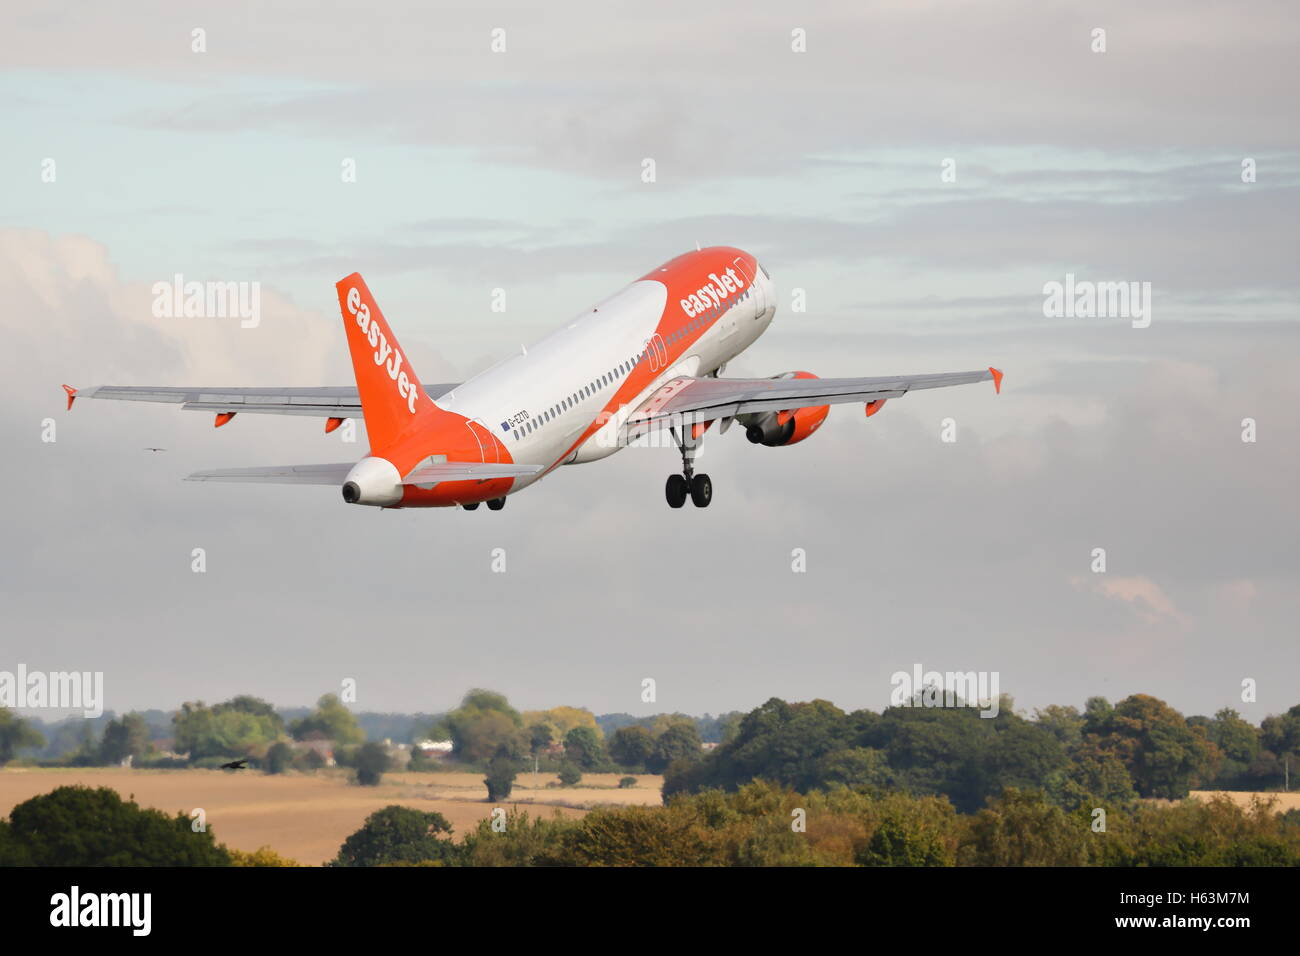 Low-cost airline Easyjet Airbus A320 G-EZTD departing from London Luton Airport, UK Stock Photo